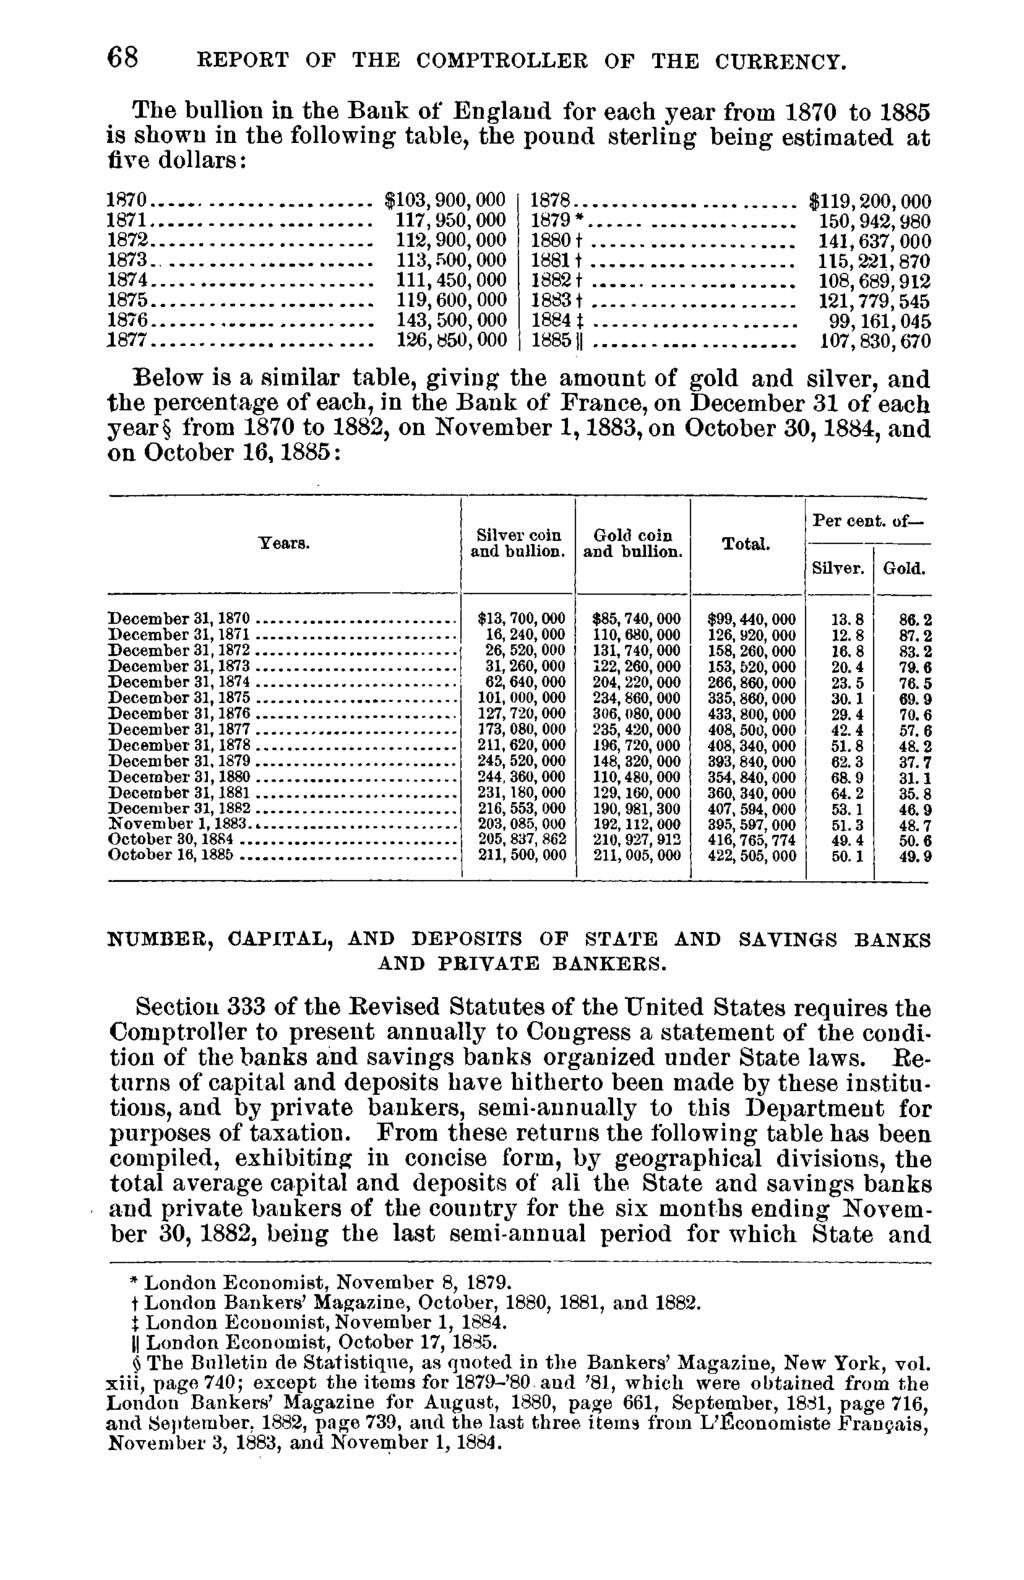 68 REPORT OF THE COMPTROLLER OF THE CURRENCY.